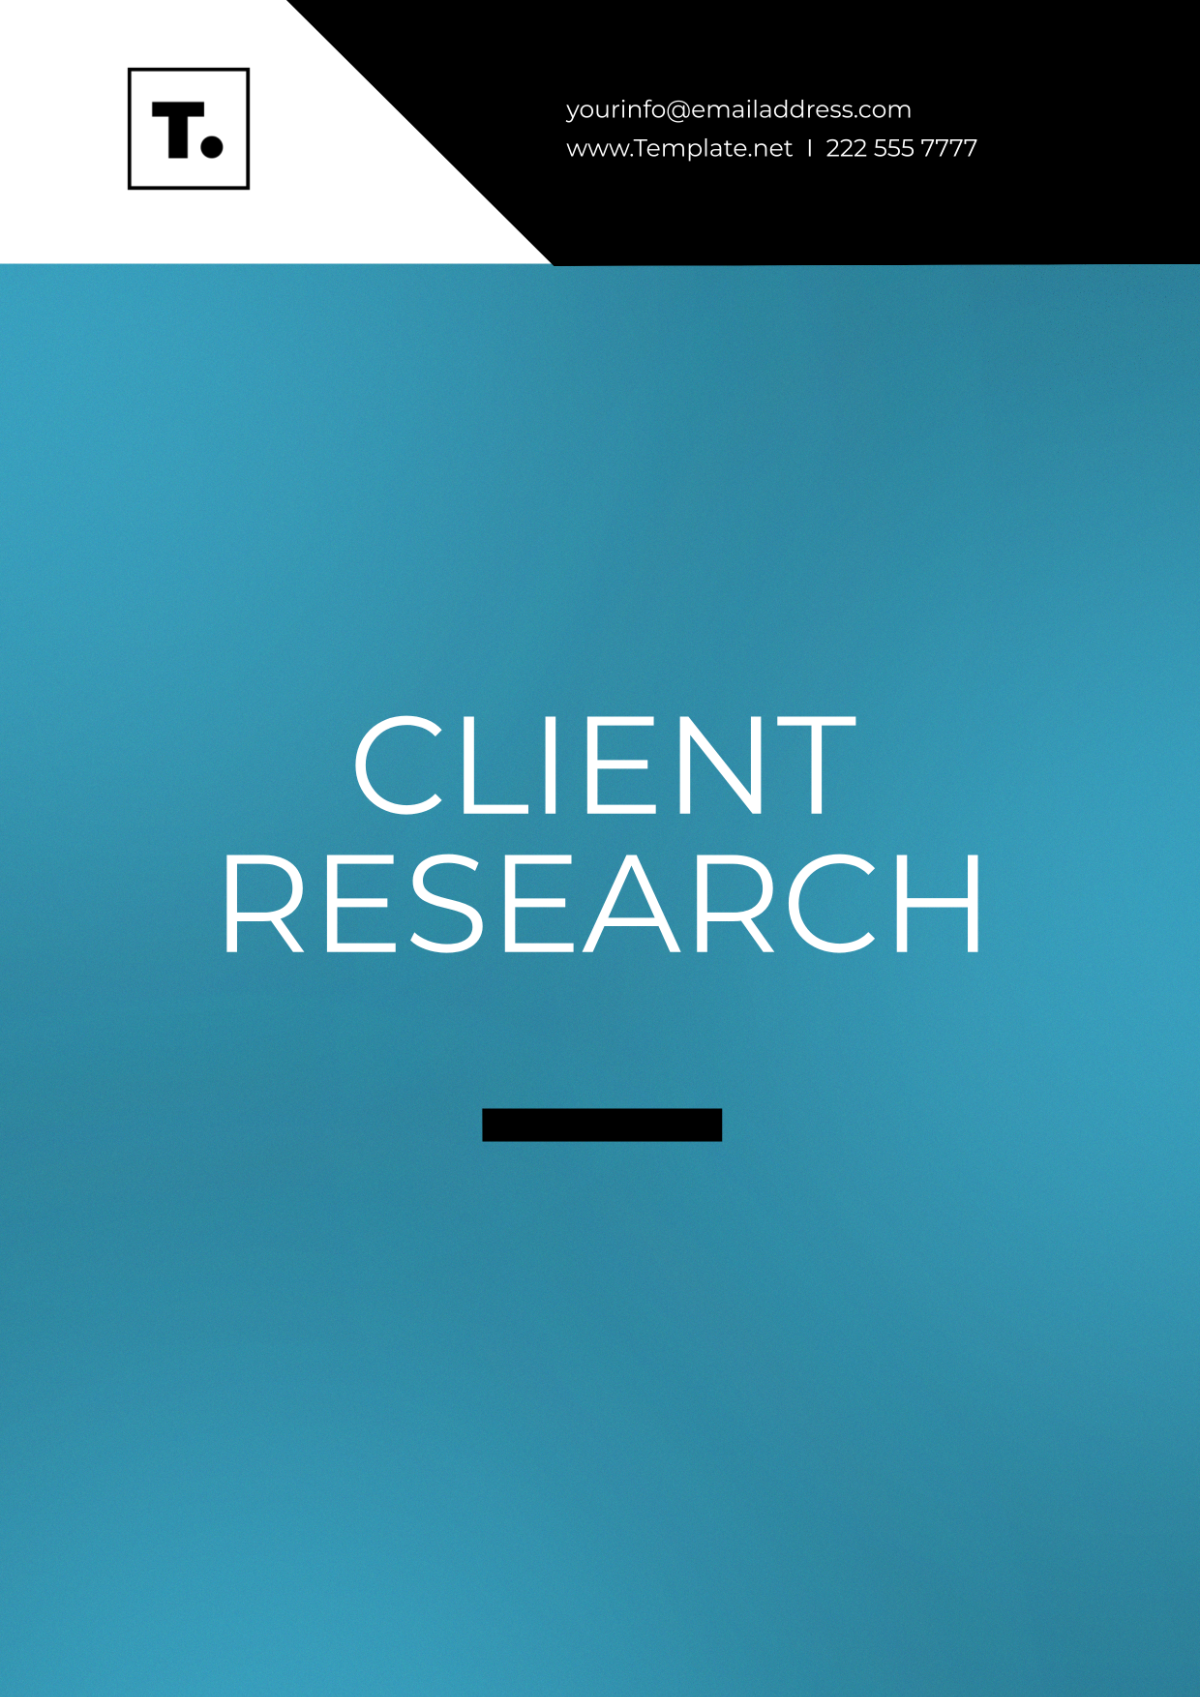 Free Client Research Template